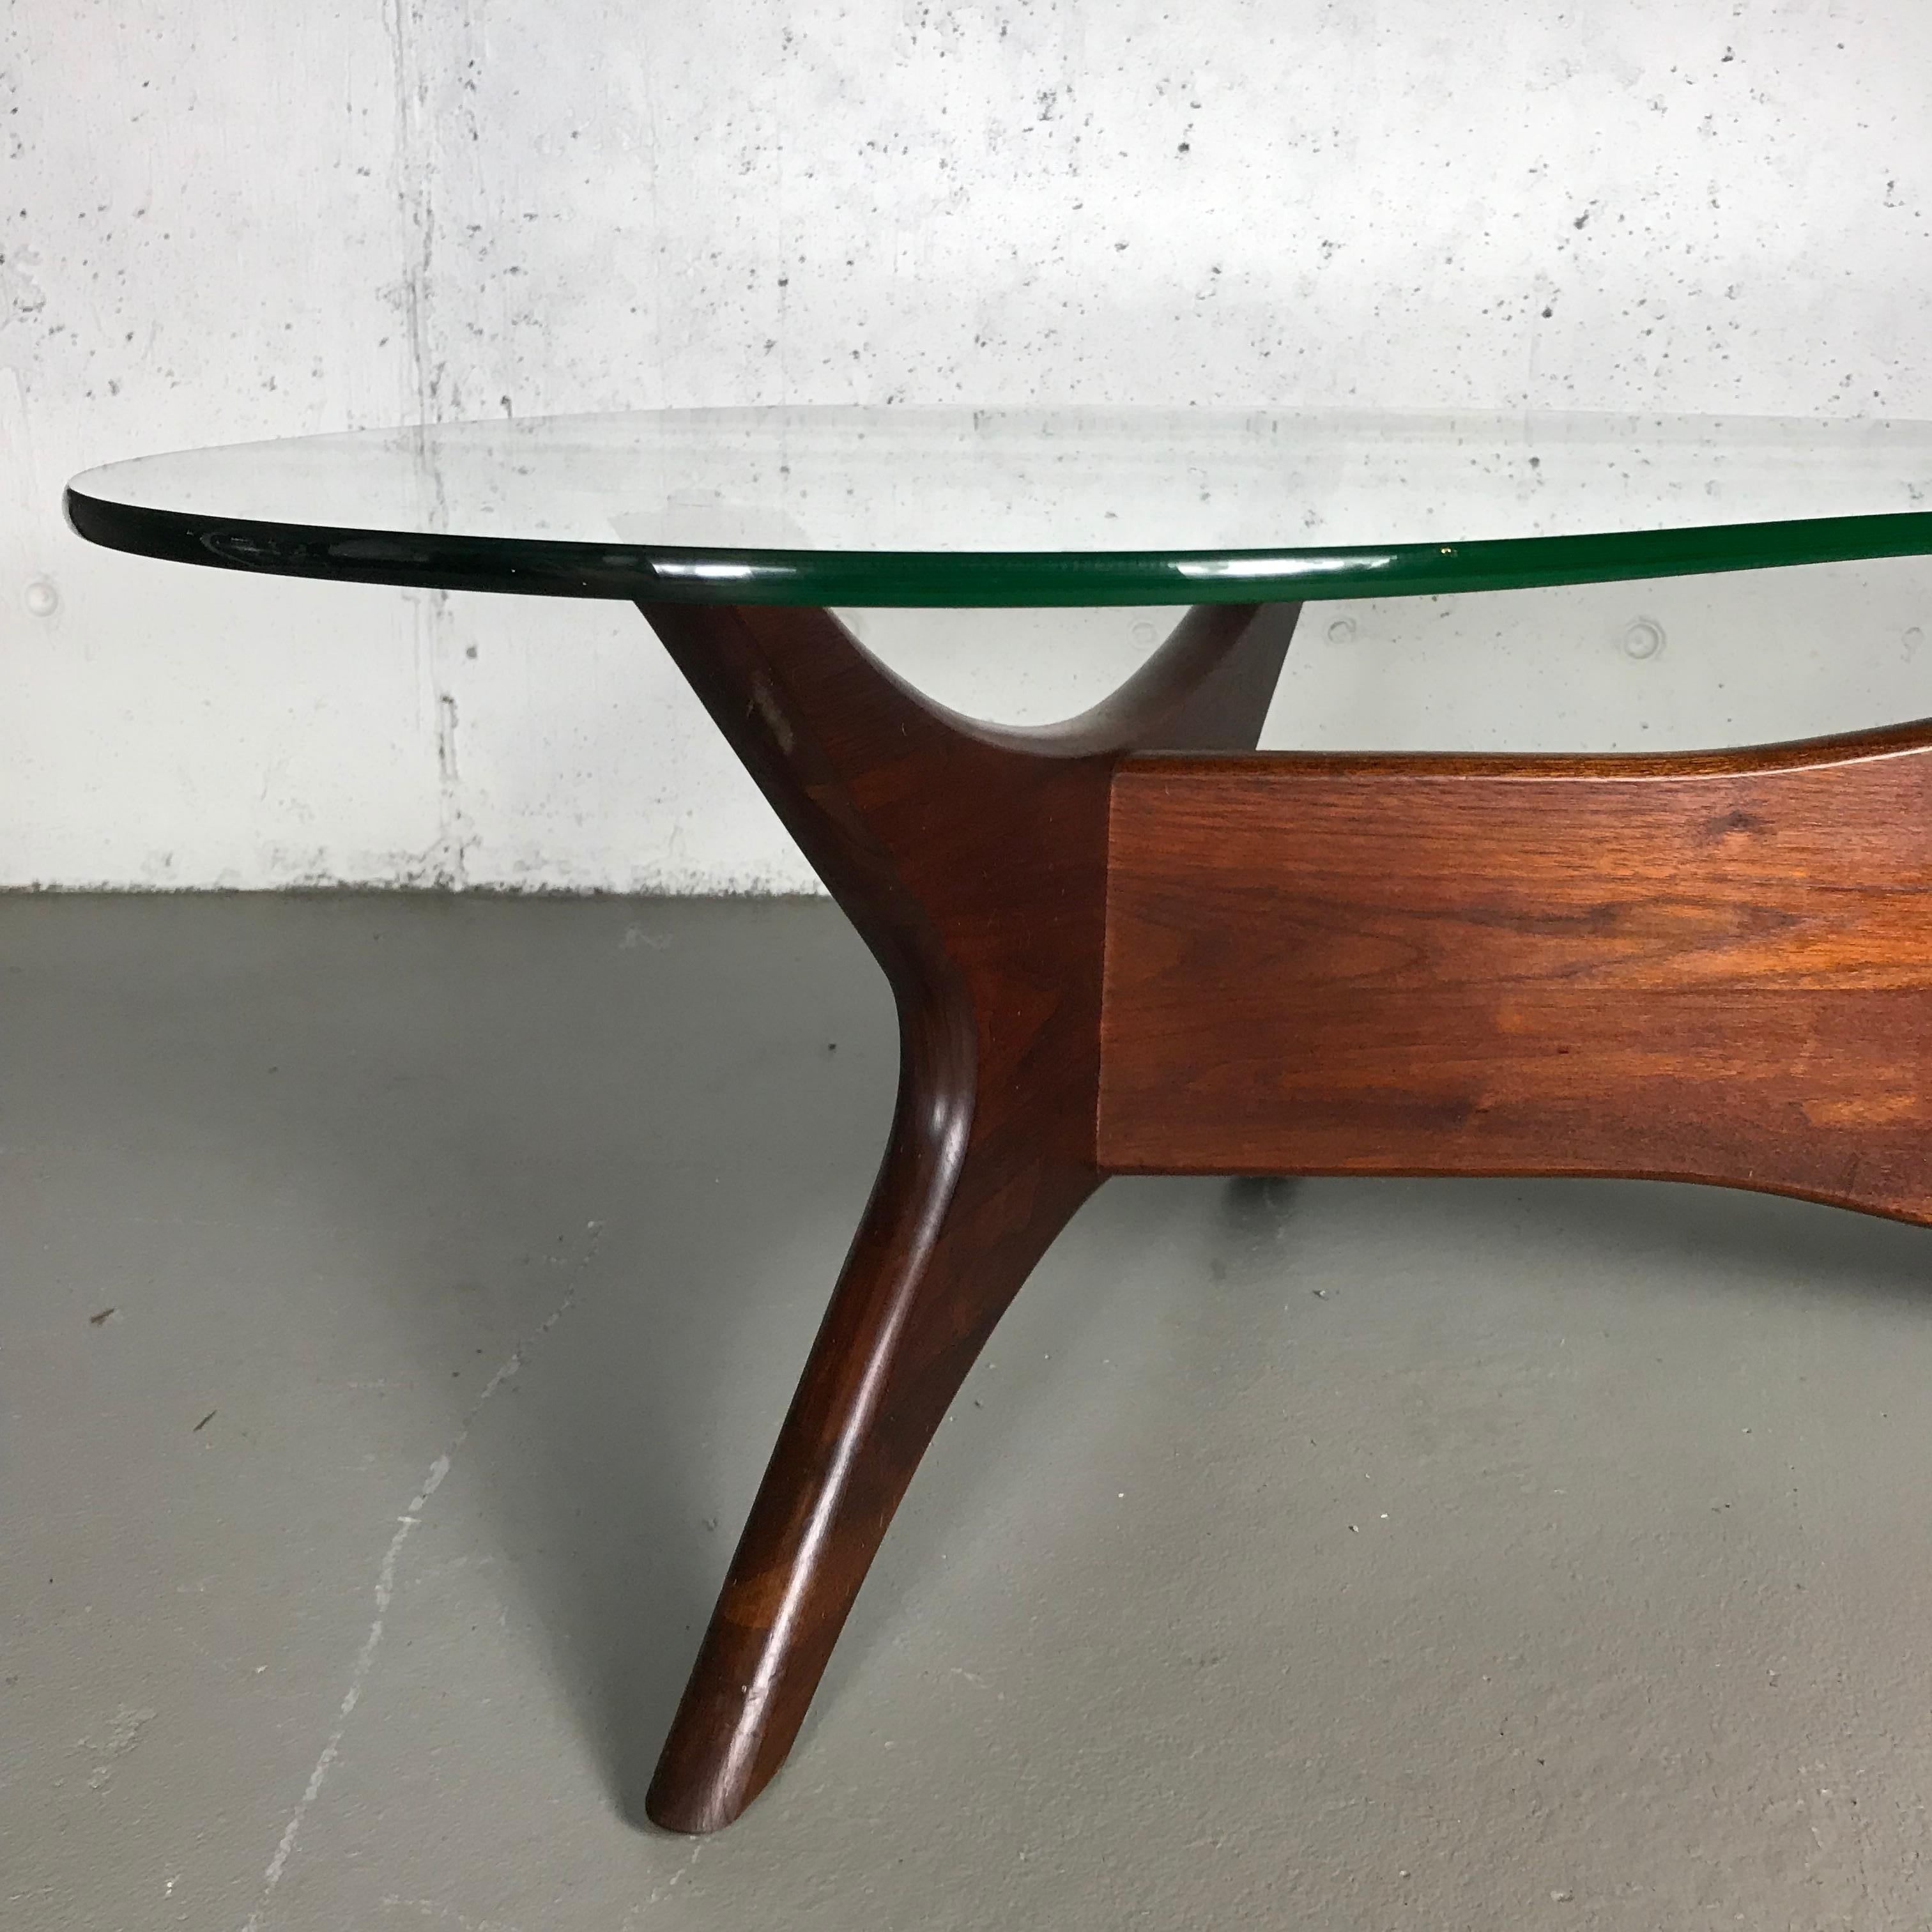 Mid-20th Century Sculptural Cocktail Table by Adrian Pearsall for Craft Associates